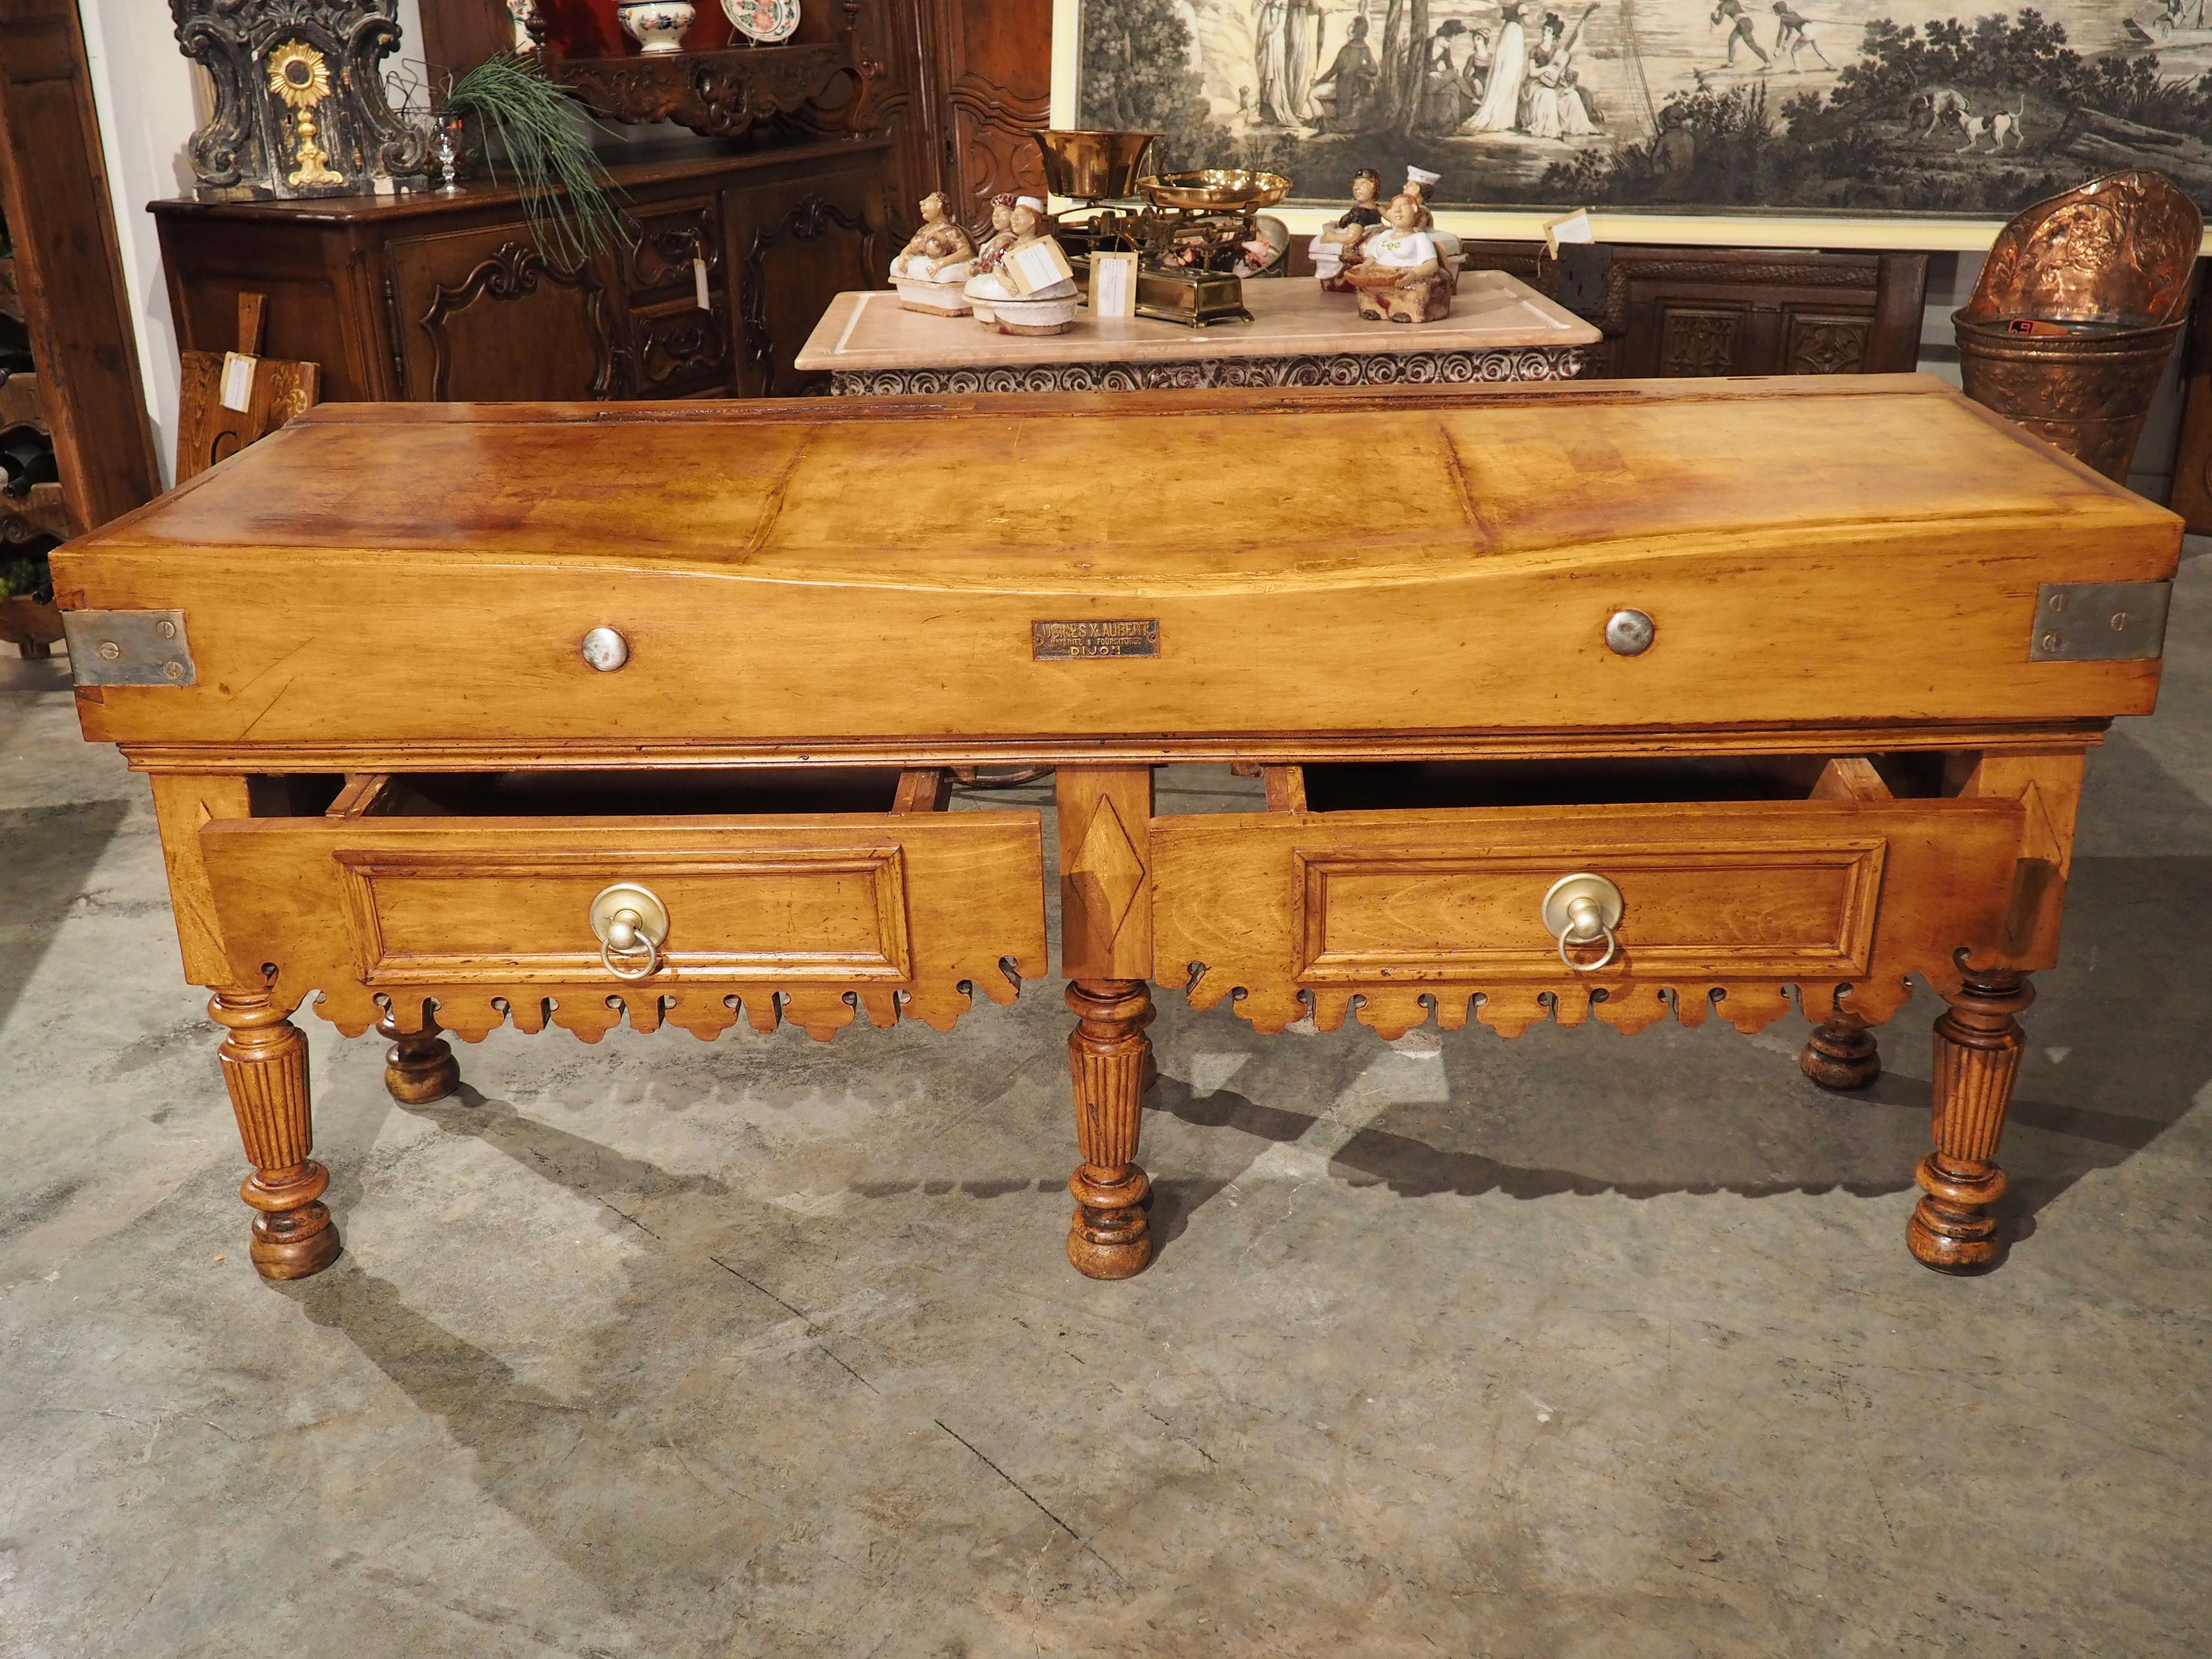 Polished Fantastic 19th Century Double Butcher Block Kitchen Island from Dijon, France